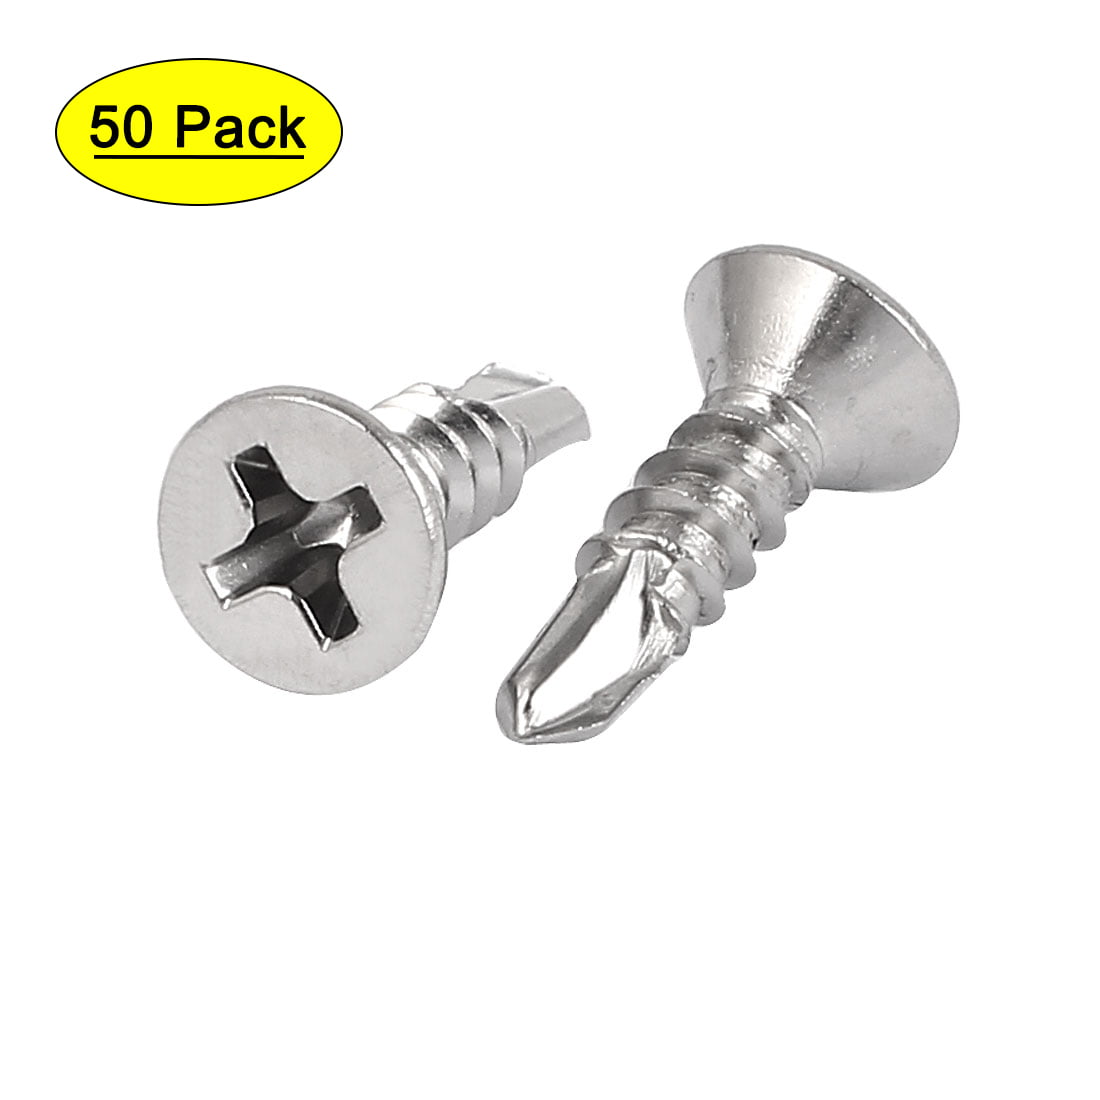 No.6 x 19mm Stainless Steel Self Tapping Screws 20 Pk.